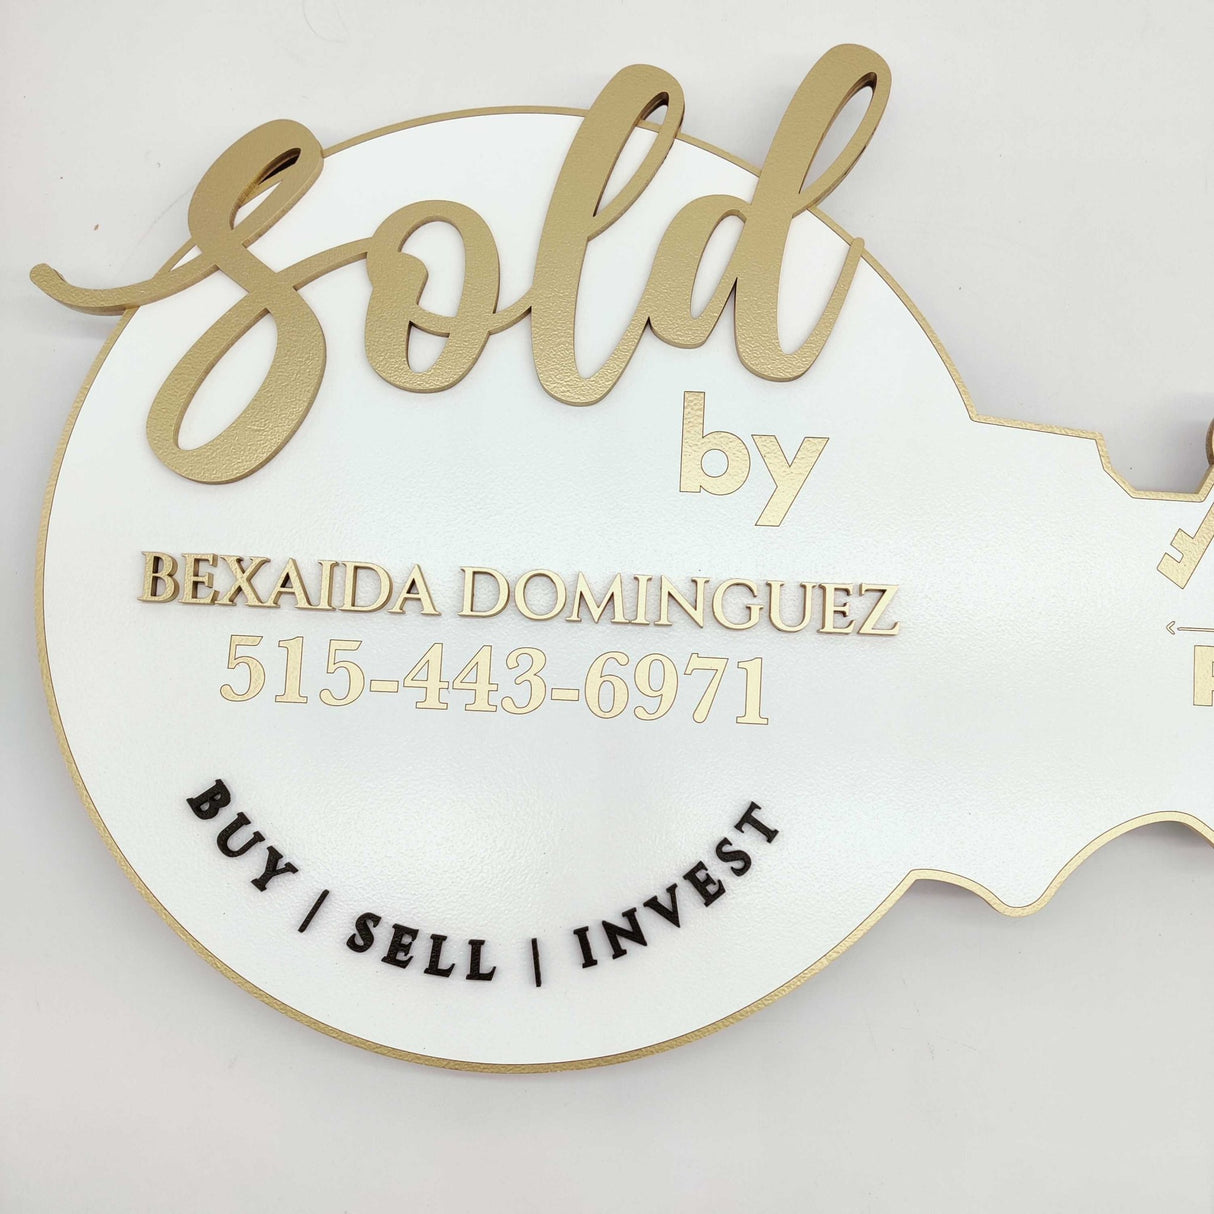 Key Shaped Prop Round Sign «Sold by» - Real Estate Store